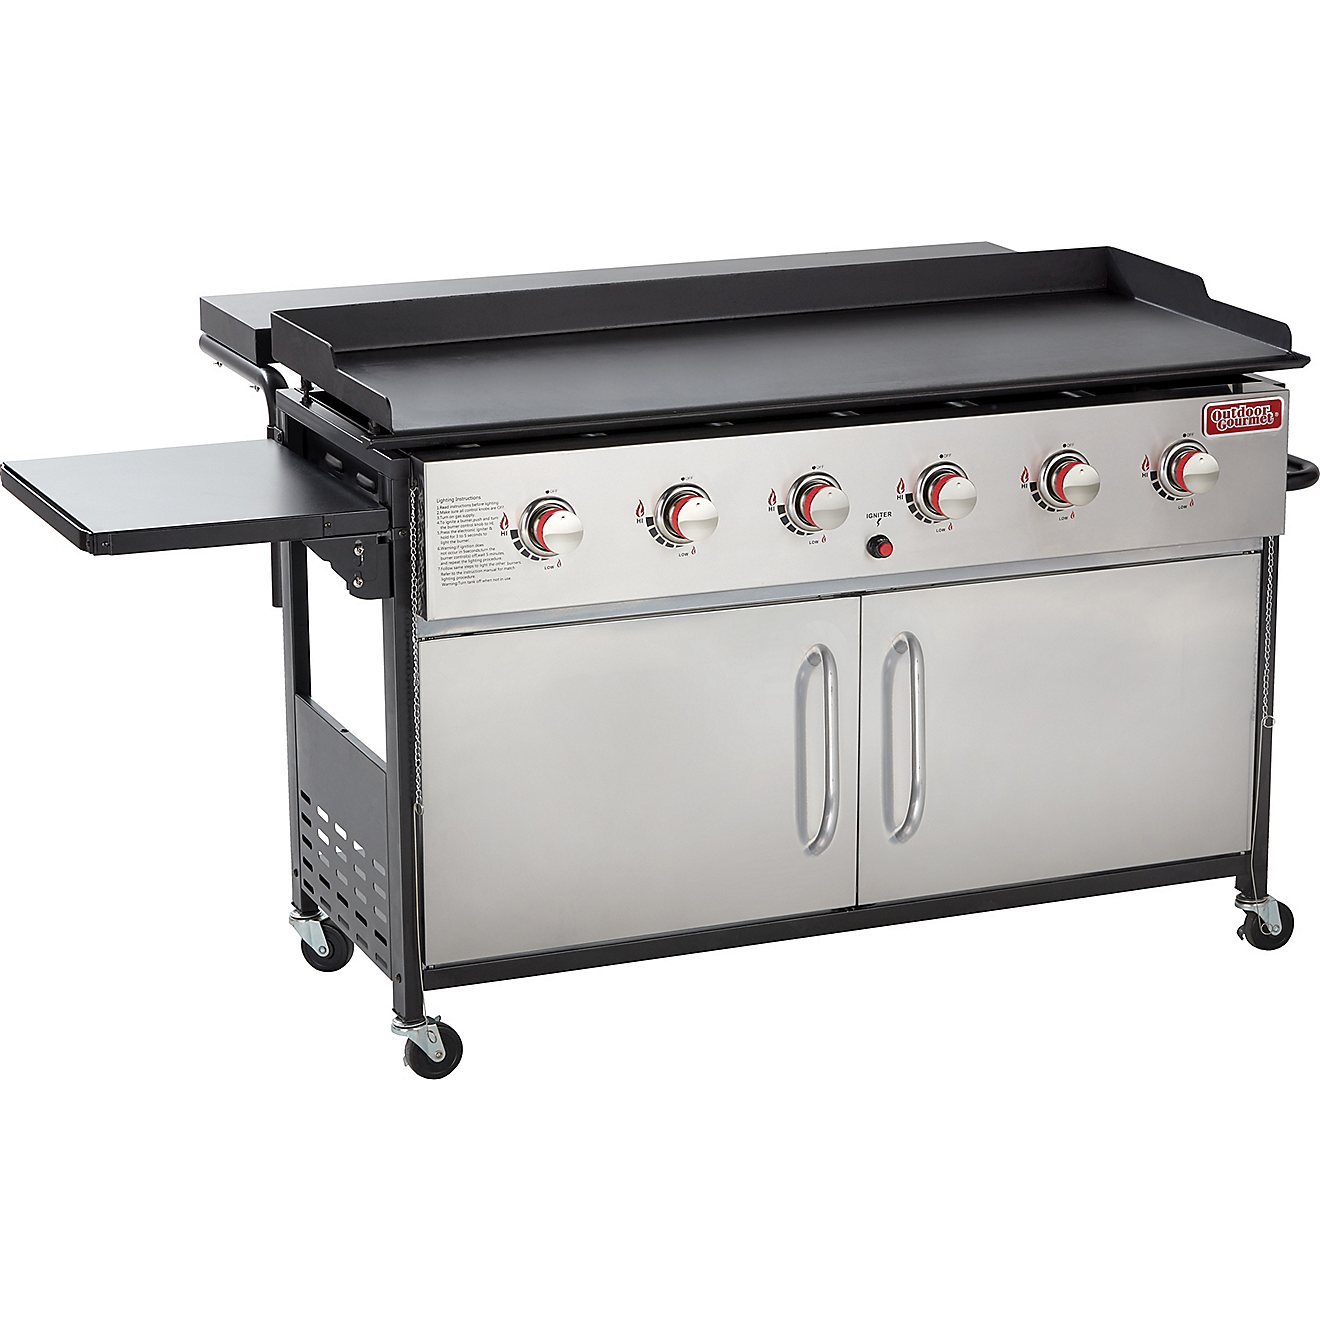 Outdoor Gourmet 6 Burner Stainless, Outdoor Propane Griddle With Cover